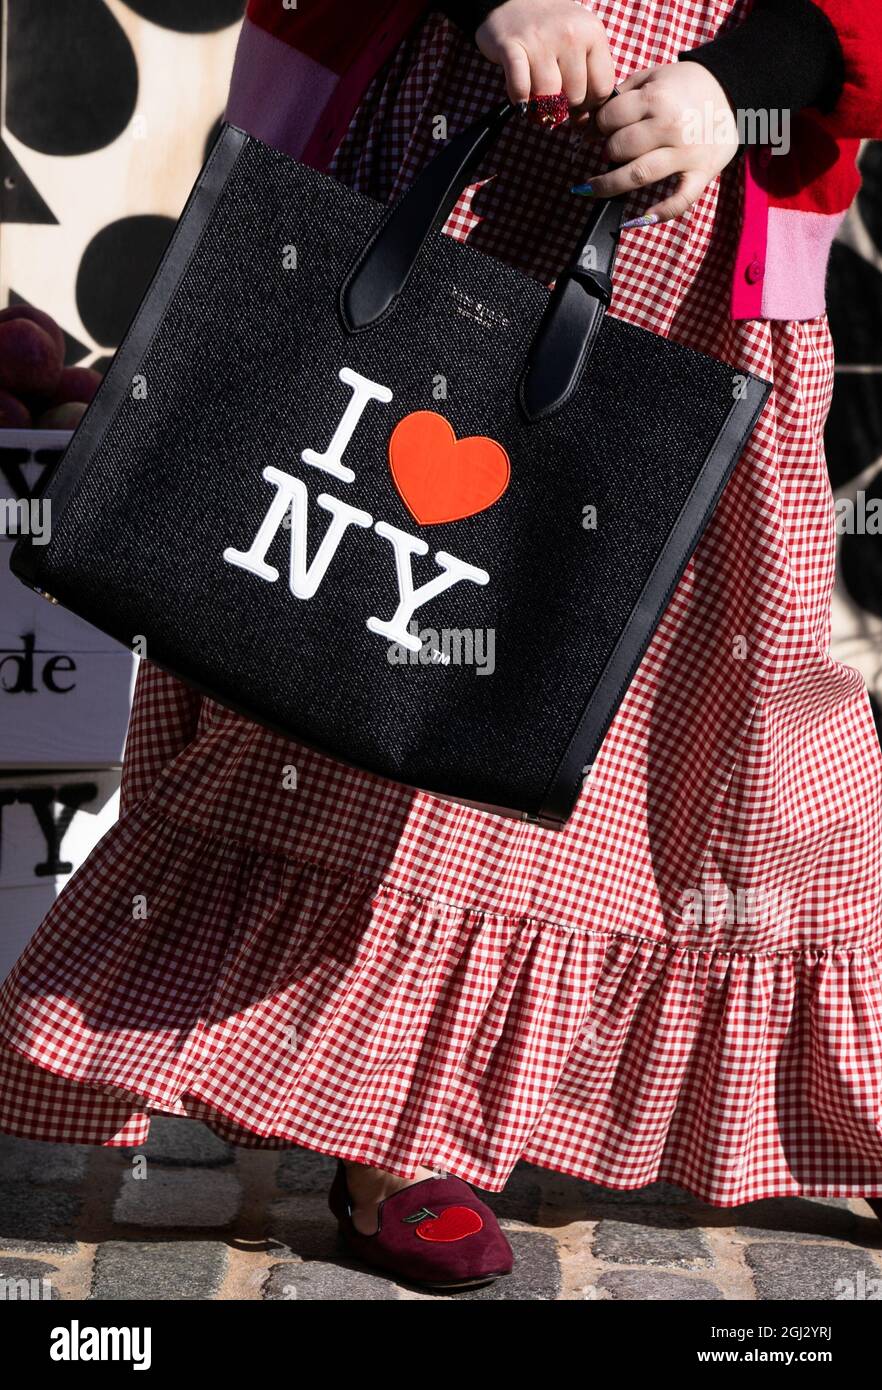 A purse from Kate Spade's Fall 2021 limited-edition I Love NY capsule  collection is seen at the Kate Spade New York Fashion Week installation in  Manhattan, New York City, ., September 8,